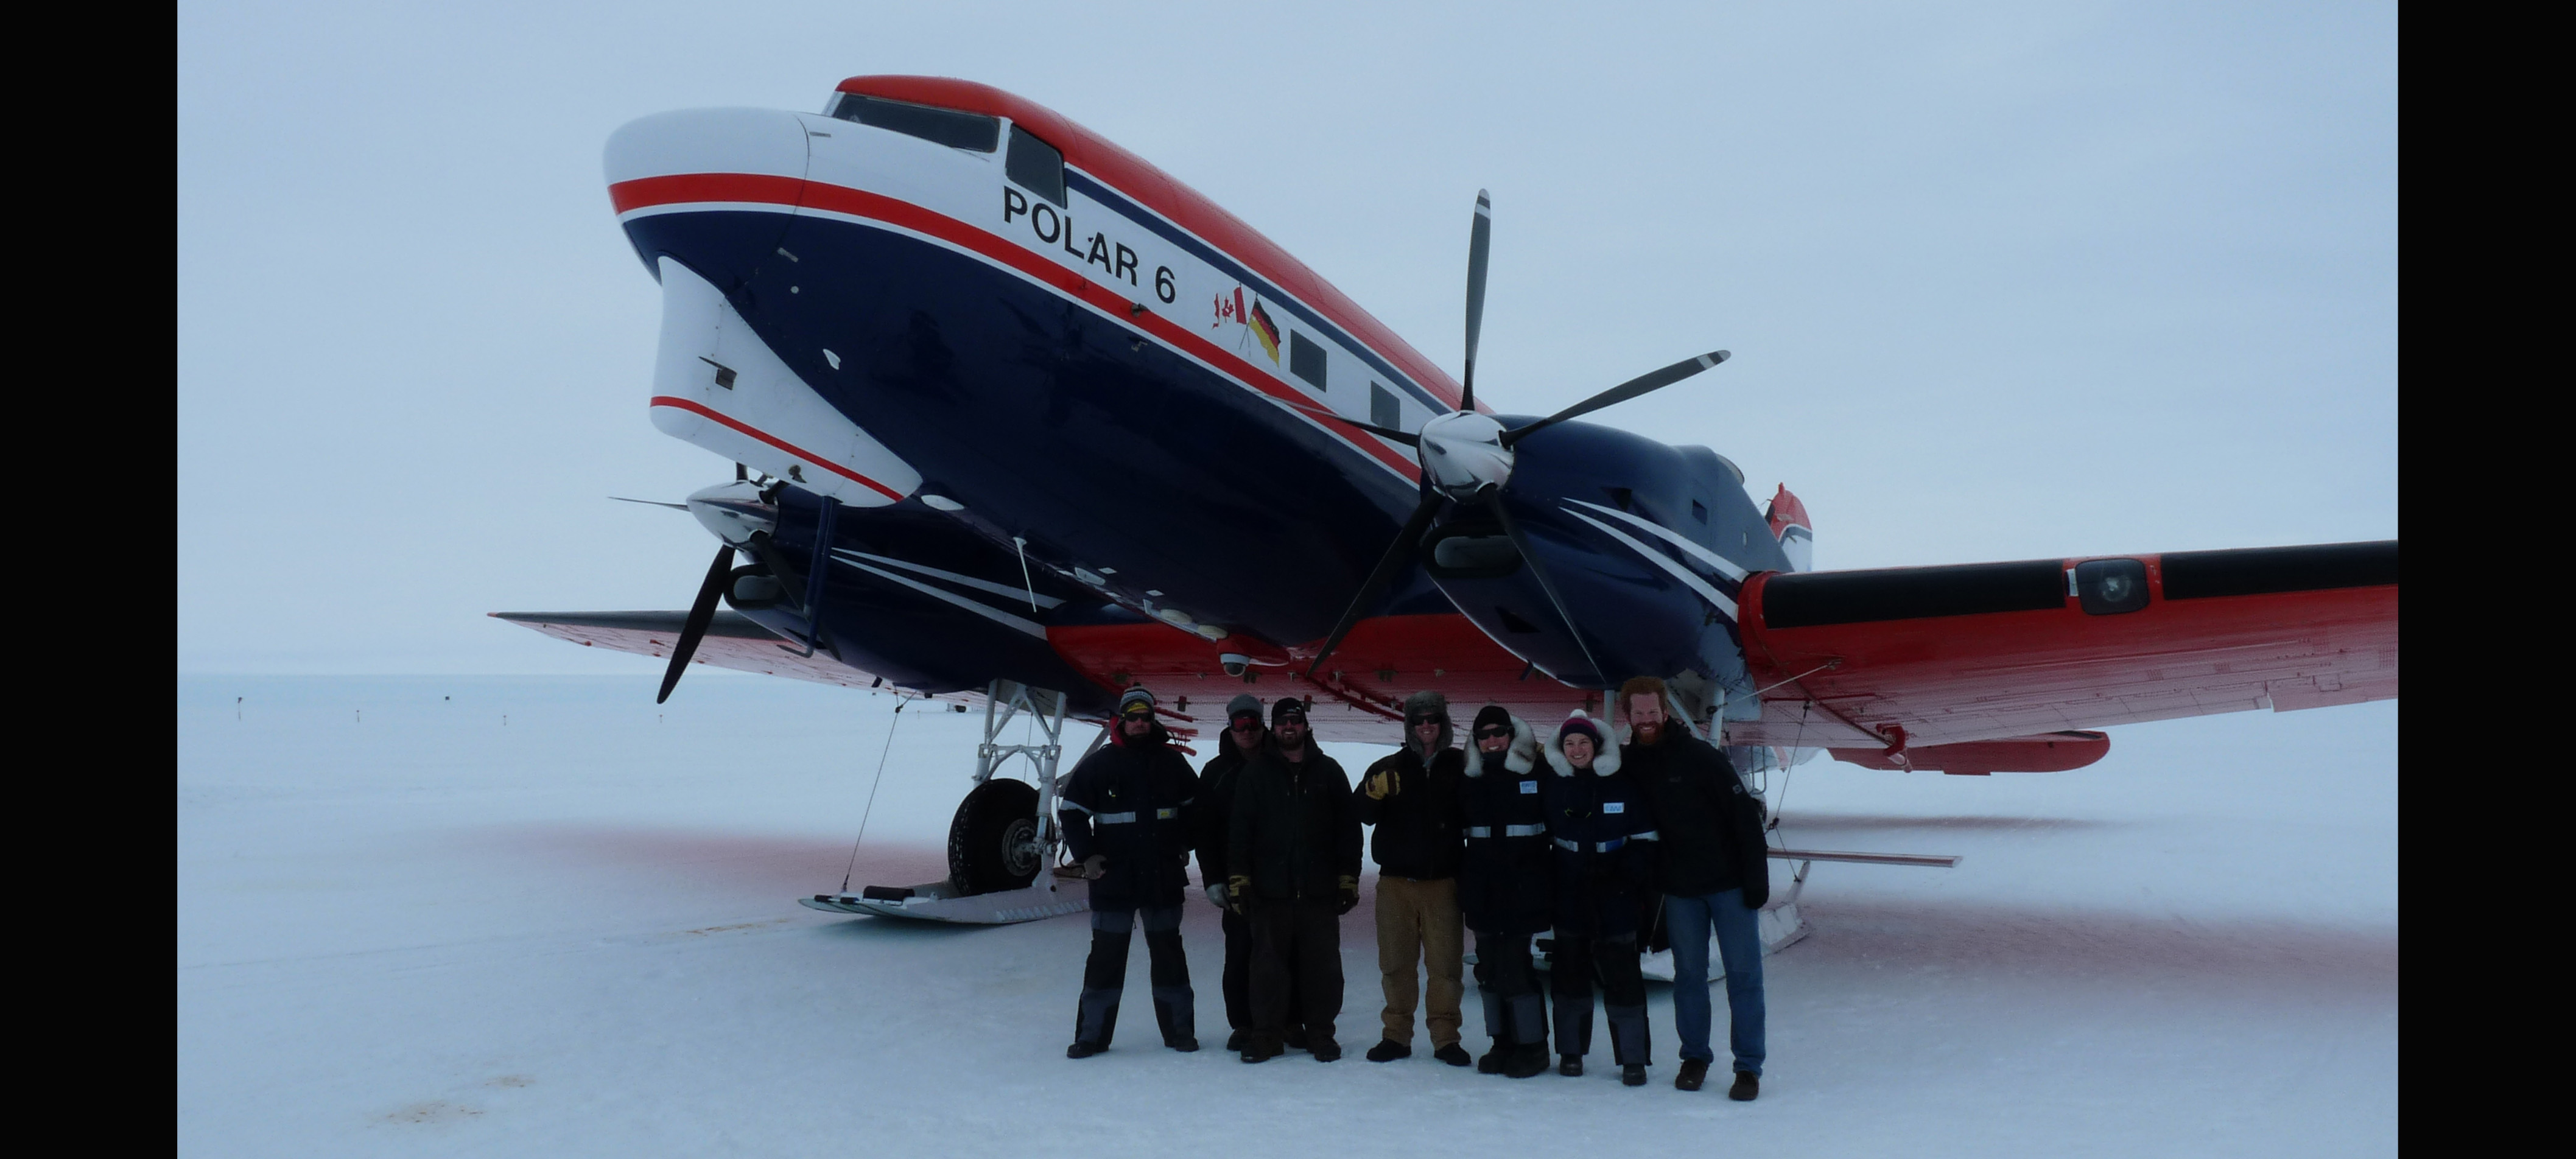 The crew and the scientists of the OIR project in front of AWI's Polar 6